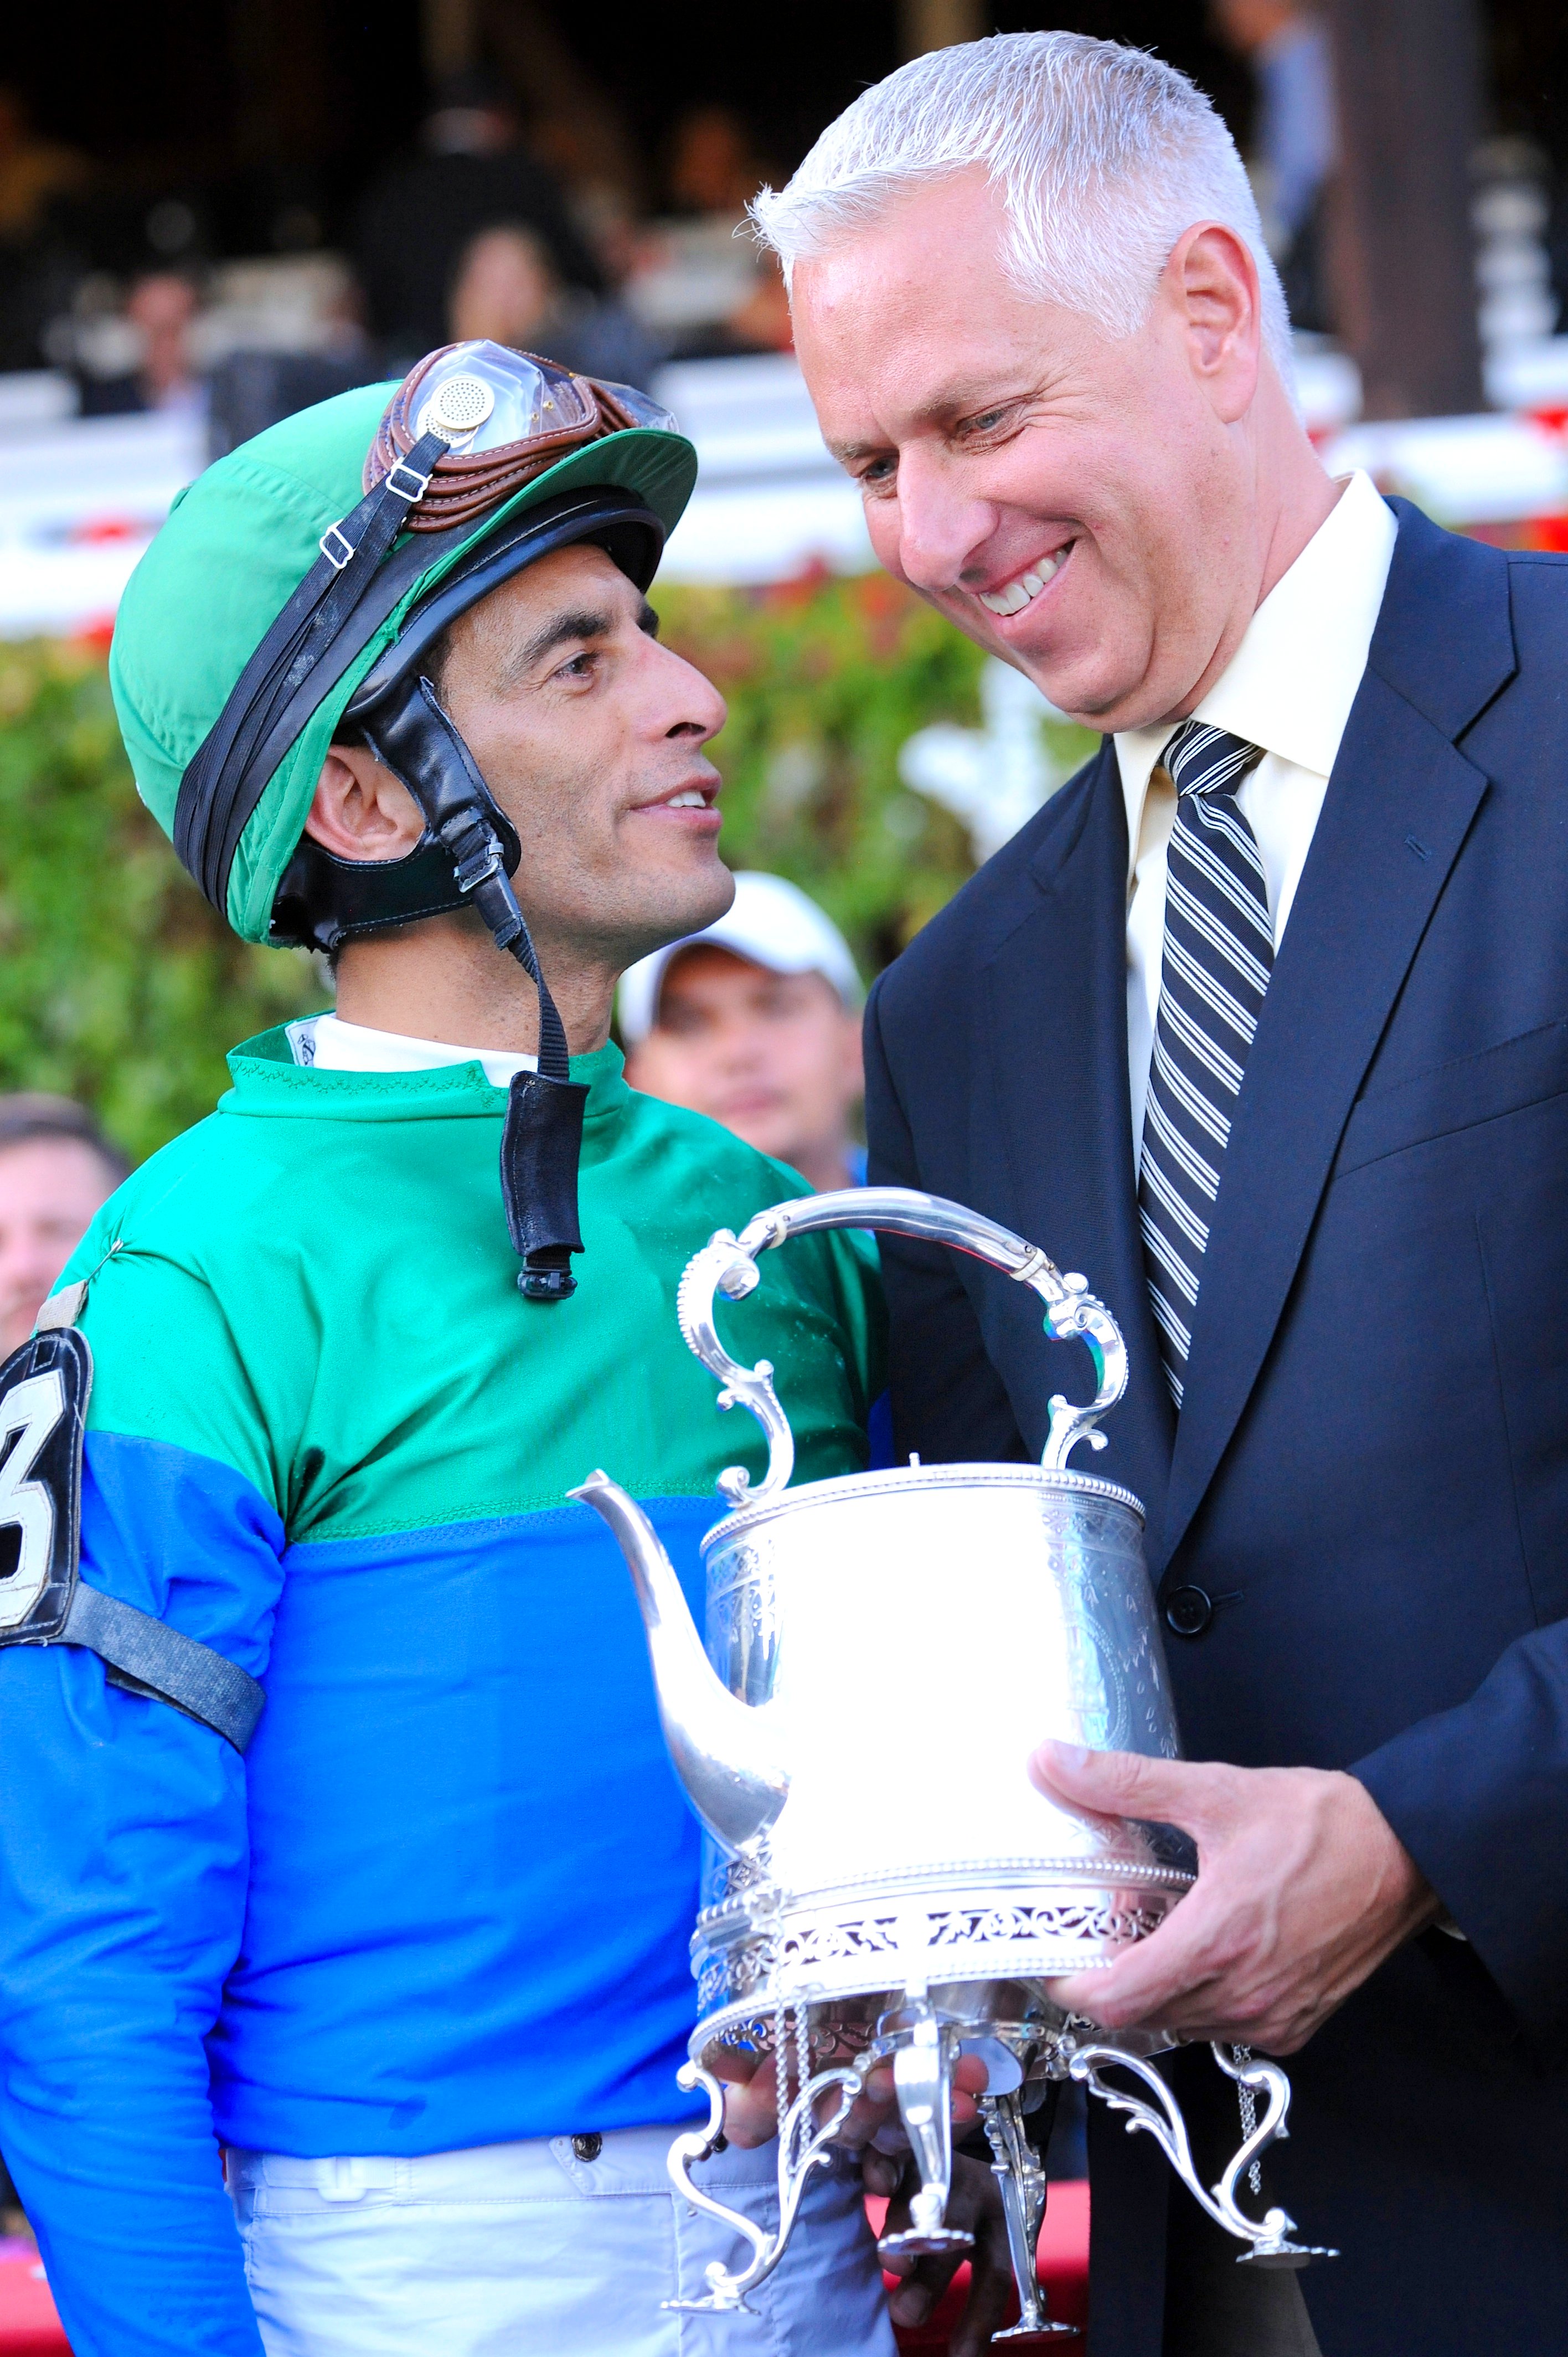 Todd Pletcher and John Velazquez at Saratoga Race Course, 2014 (Bob Mayberger/Museum Collection)